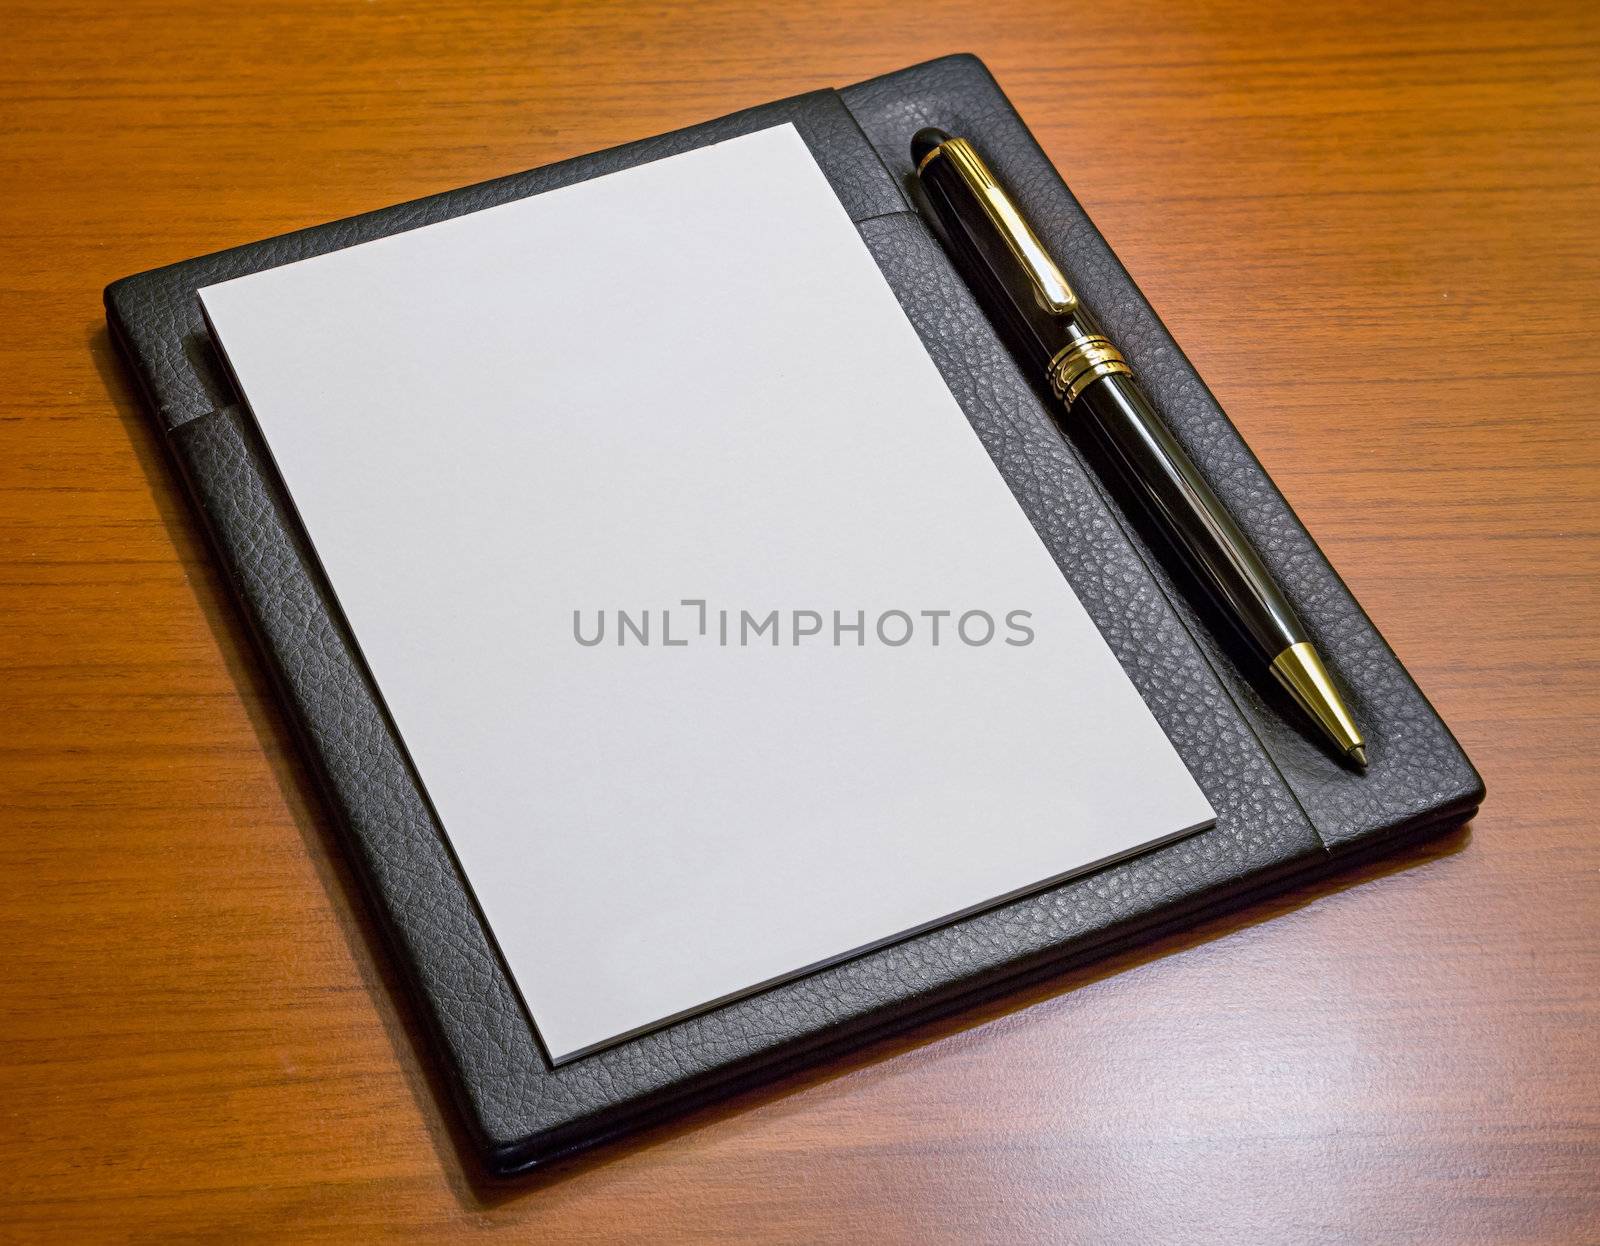 Elegance Note Paper with luxury pen in leather holder on wood table